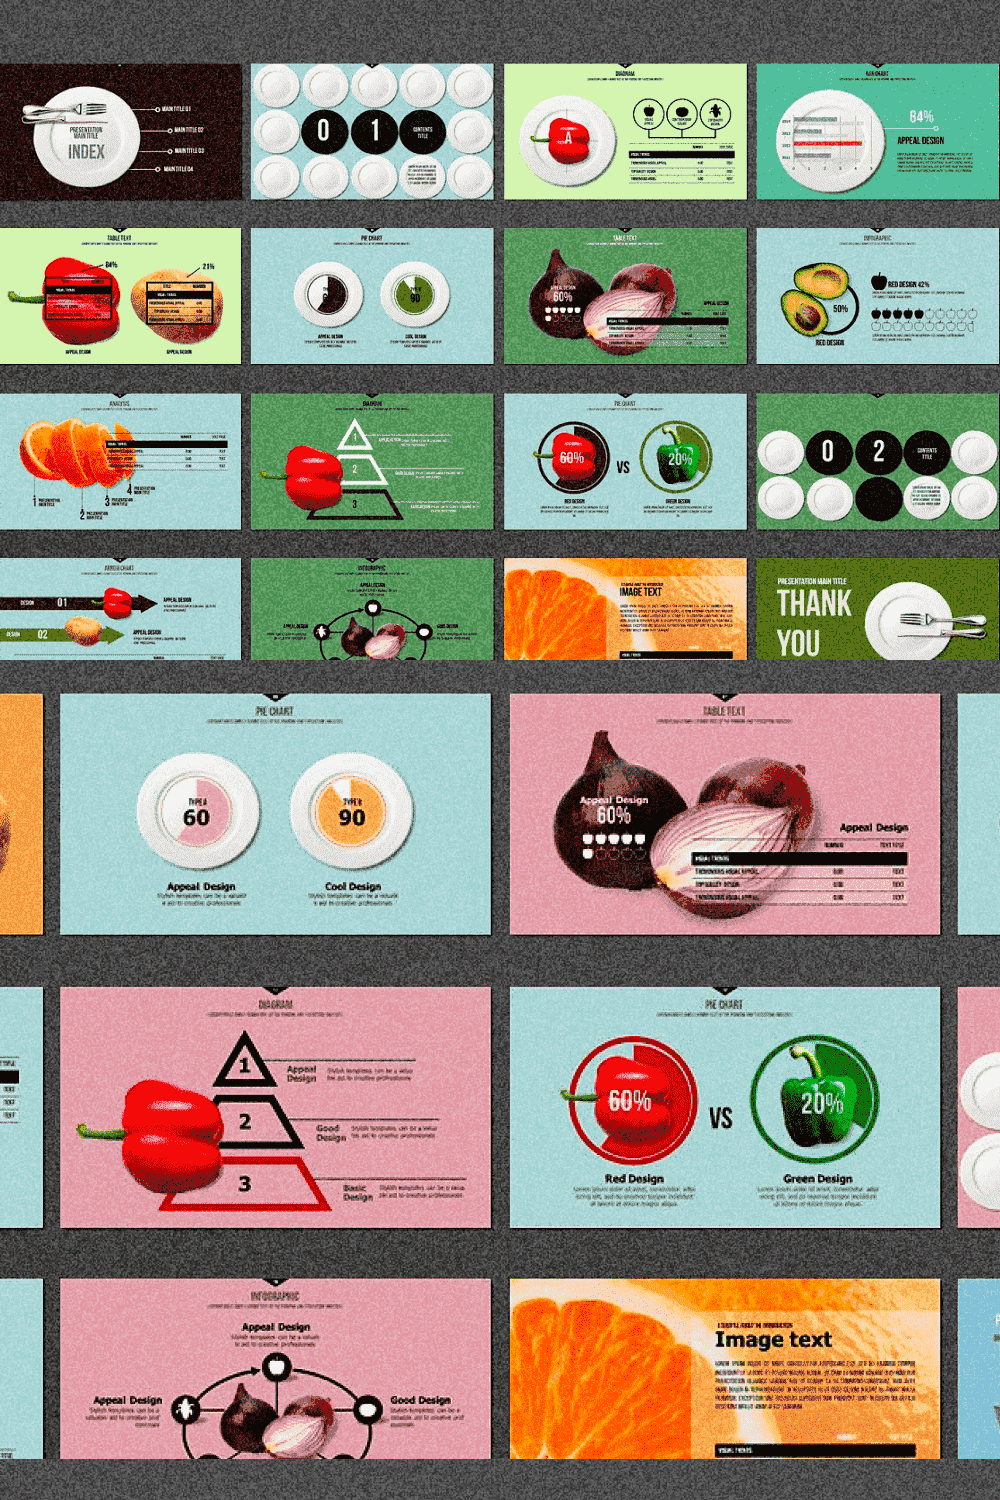 About Food - Presentation Template - "Appeal Design".